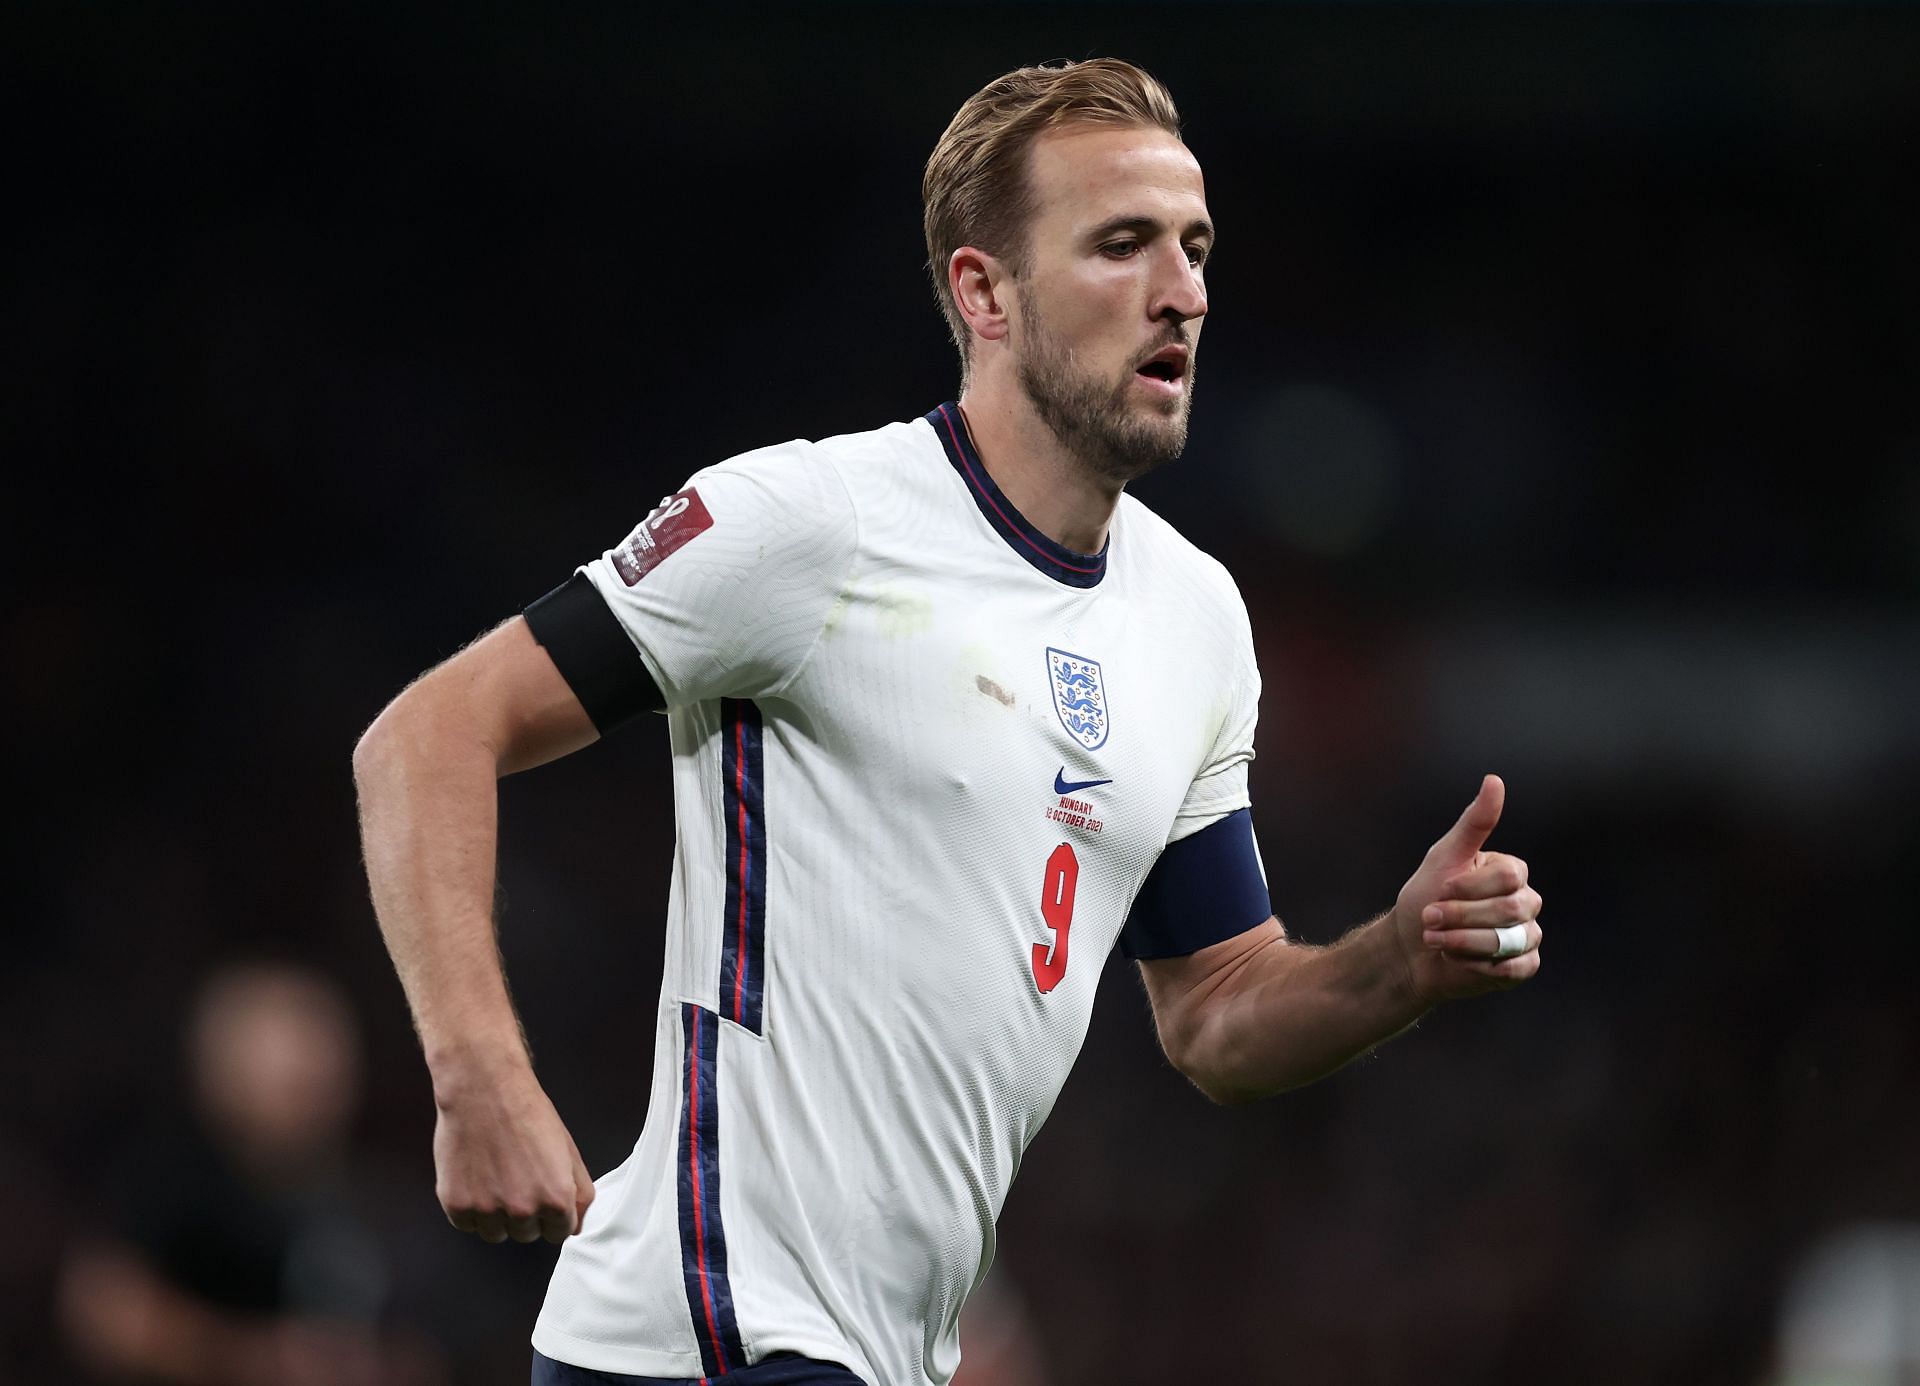 Kane is one of the best strikers in the world (Image via Getty)